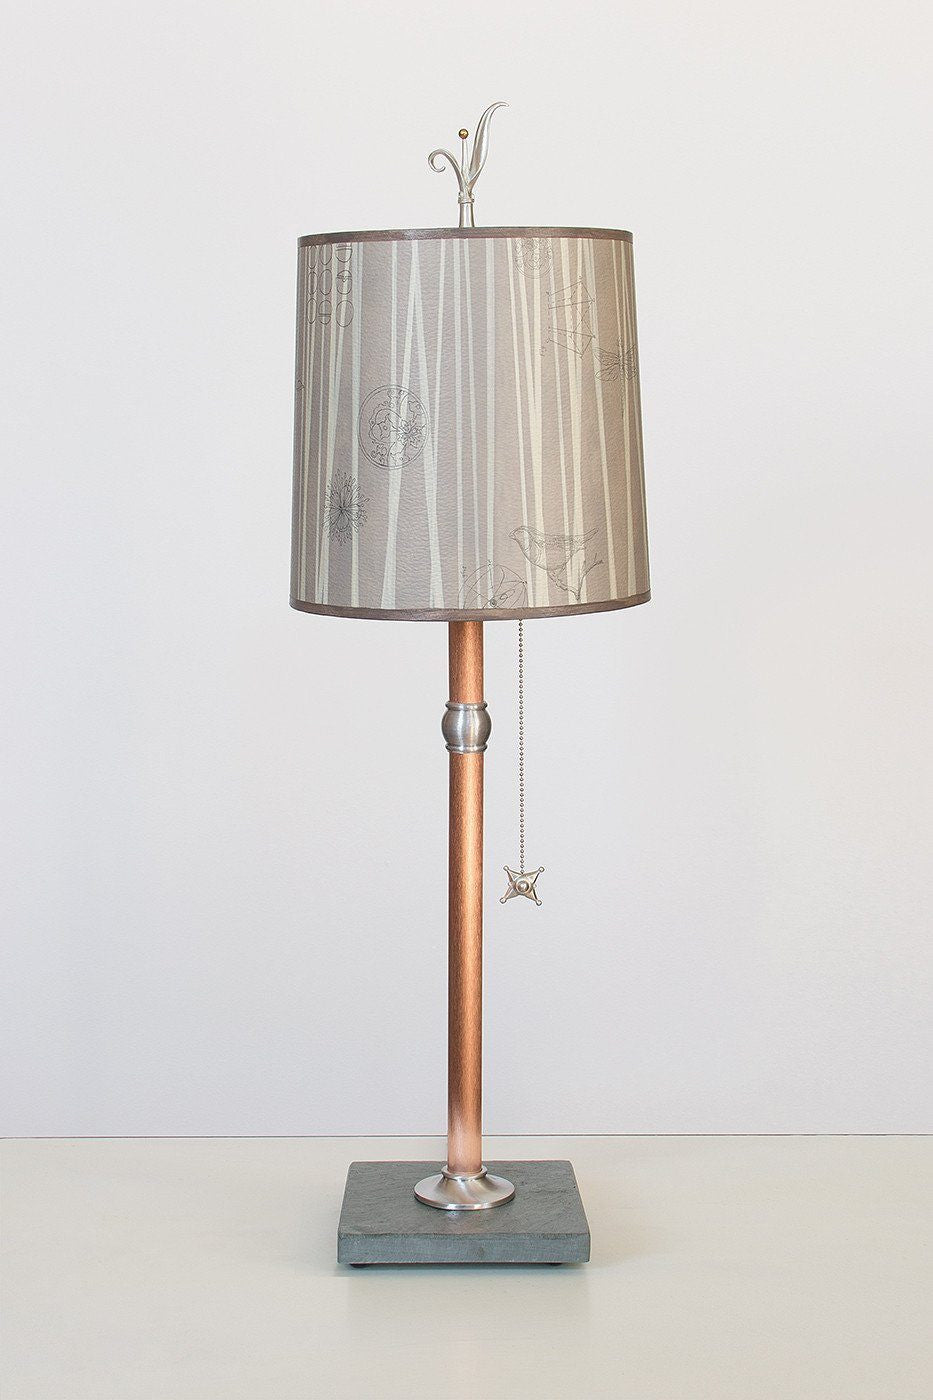 Janna Ugone & Co Table Lamps Copper Table Lamp with Medium Drum Shade in Birch Lines